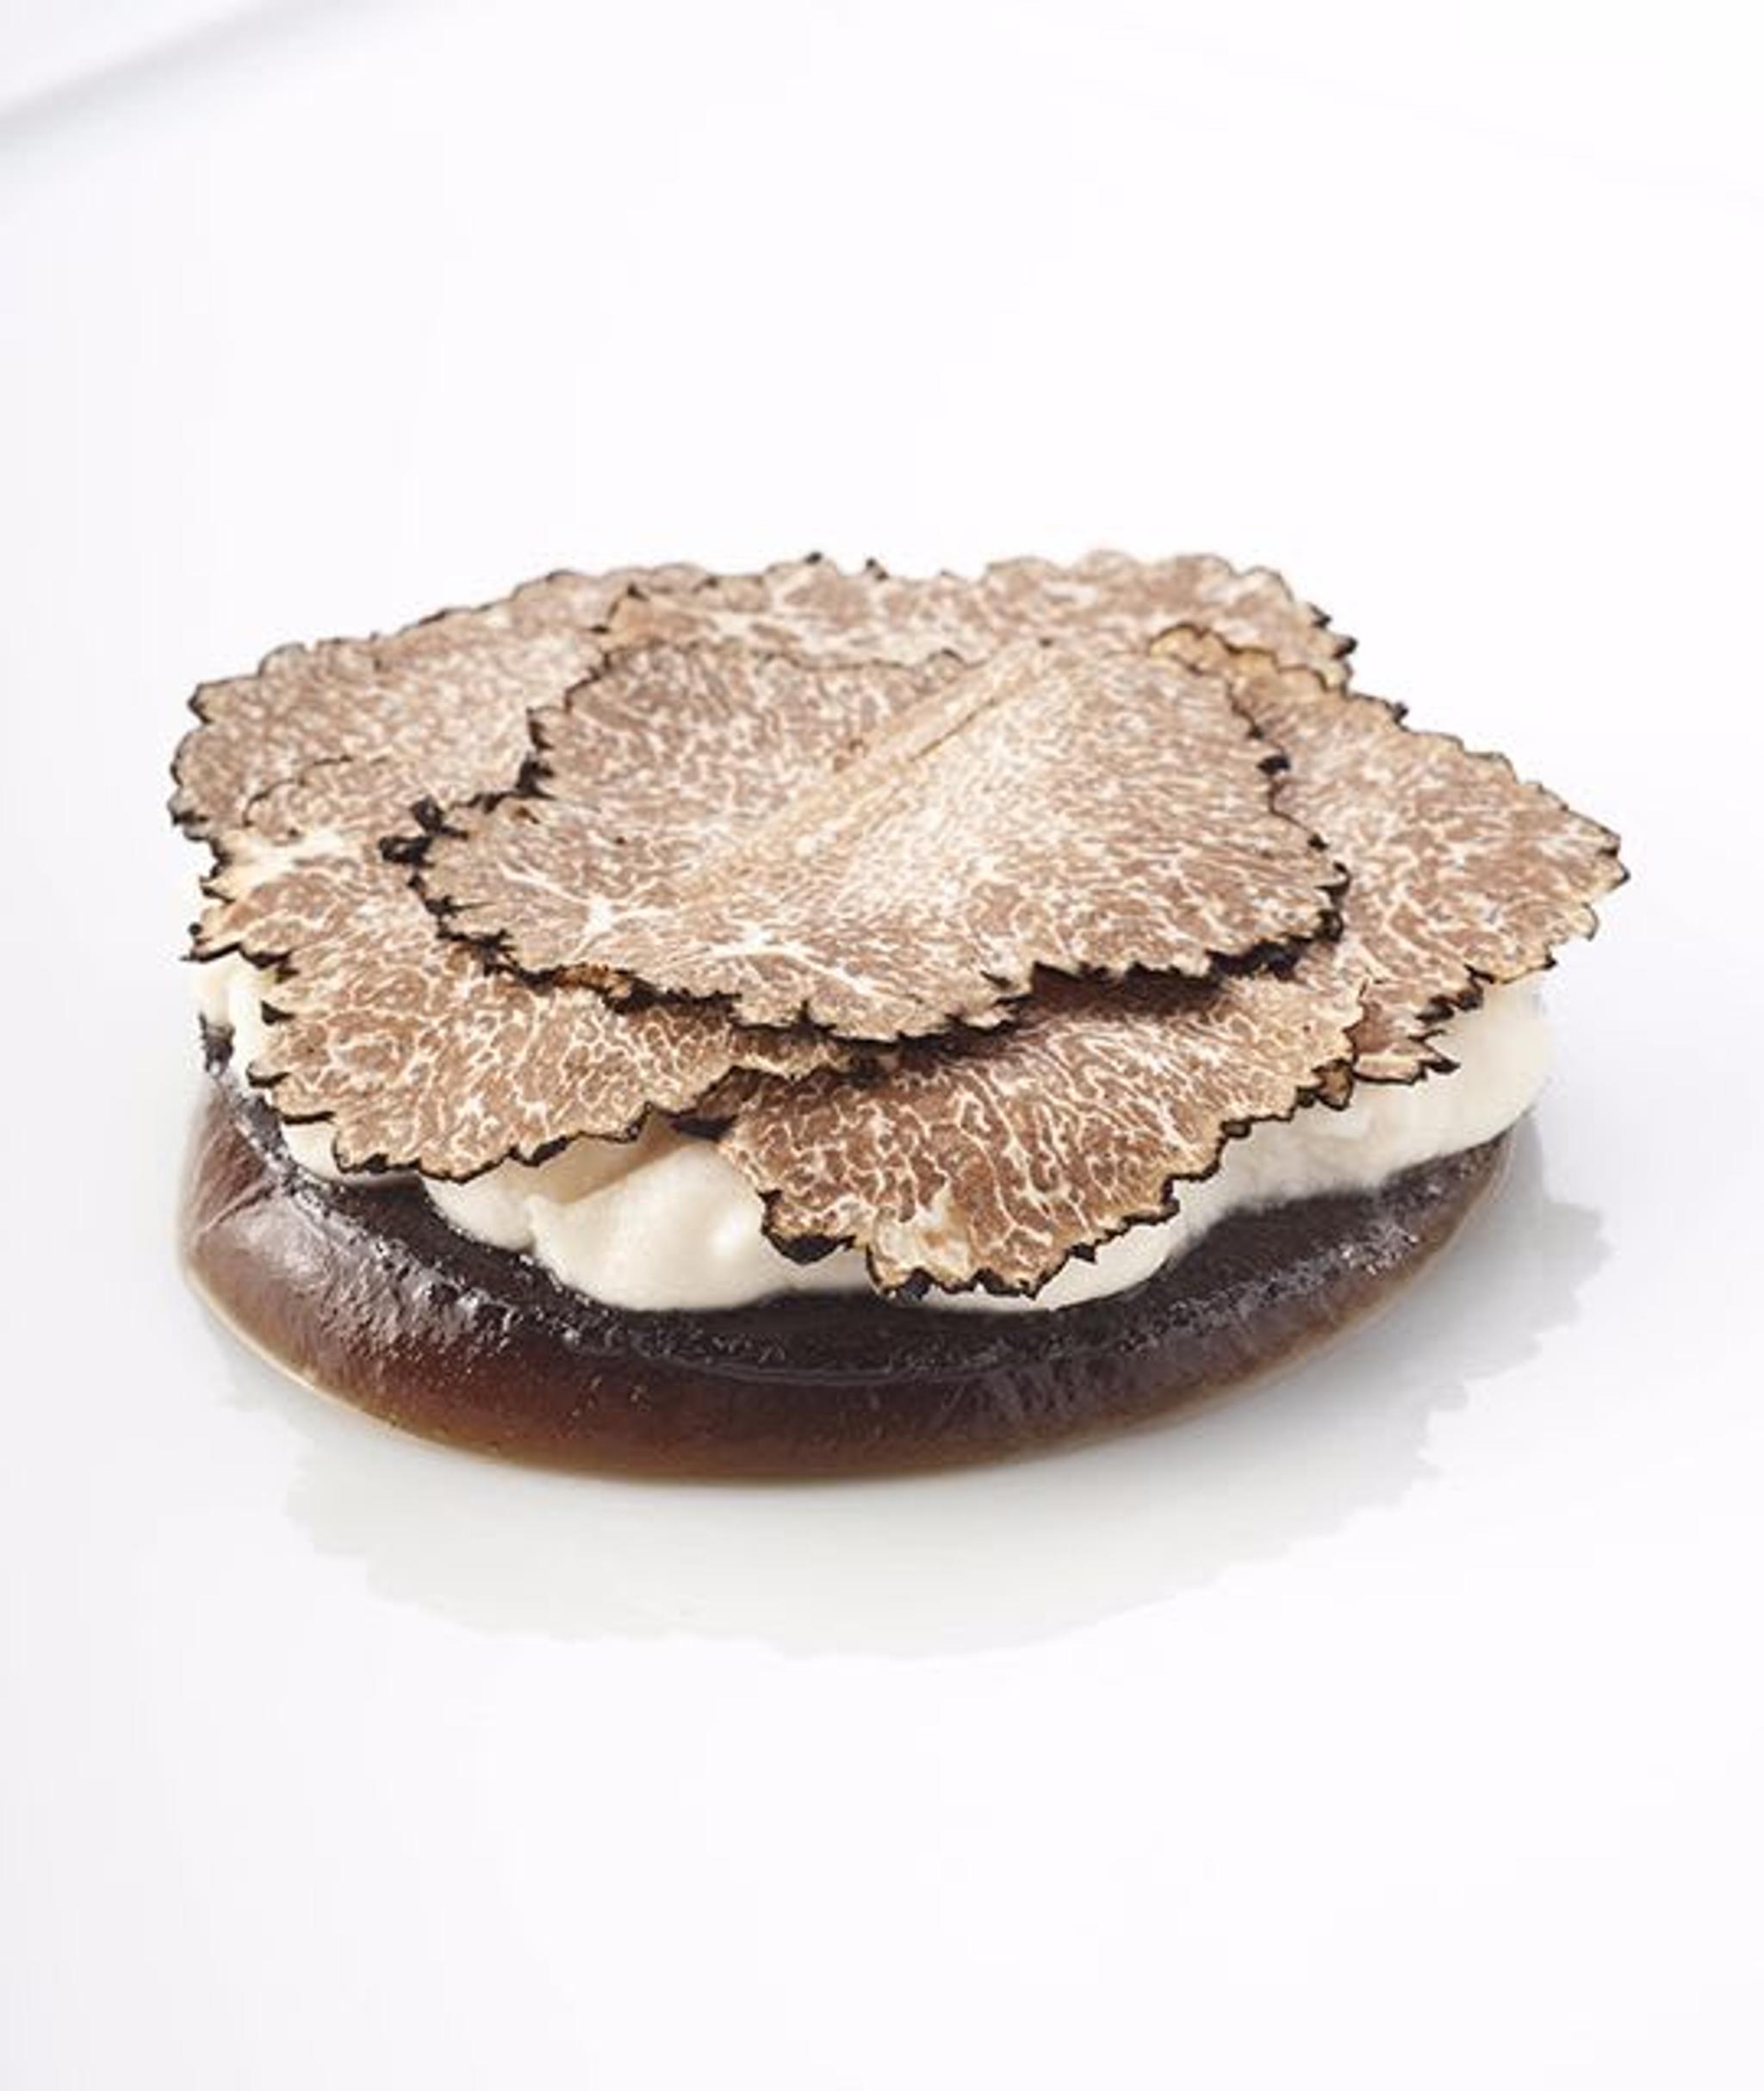 Beautiful dishes are created by Chef Niko Romito. On photo: Veal jelly, dried porcini, almonds and black truffles.